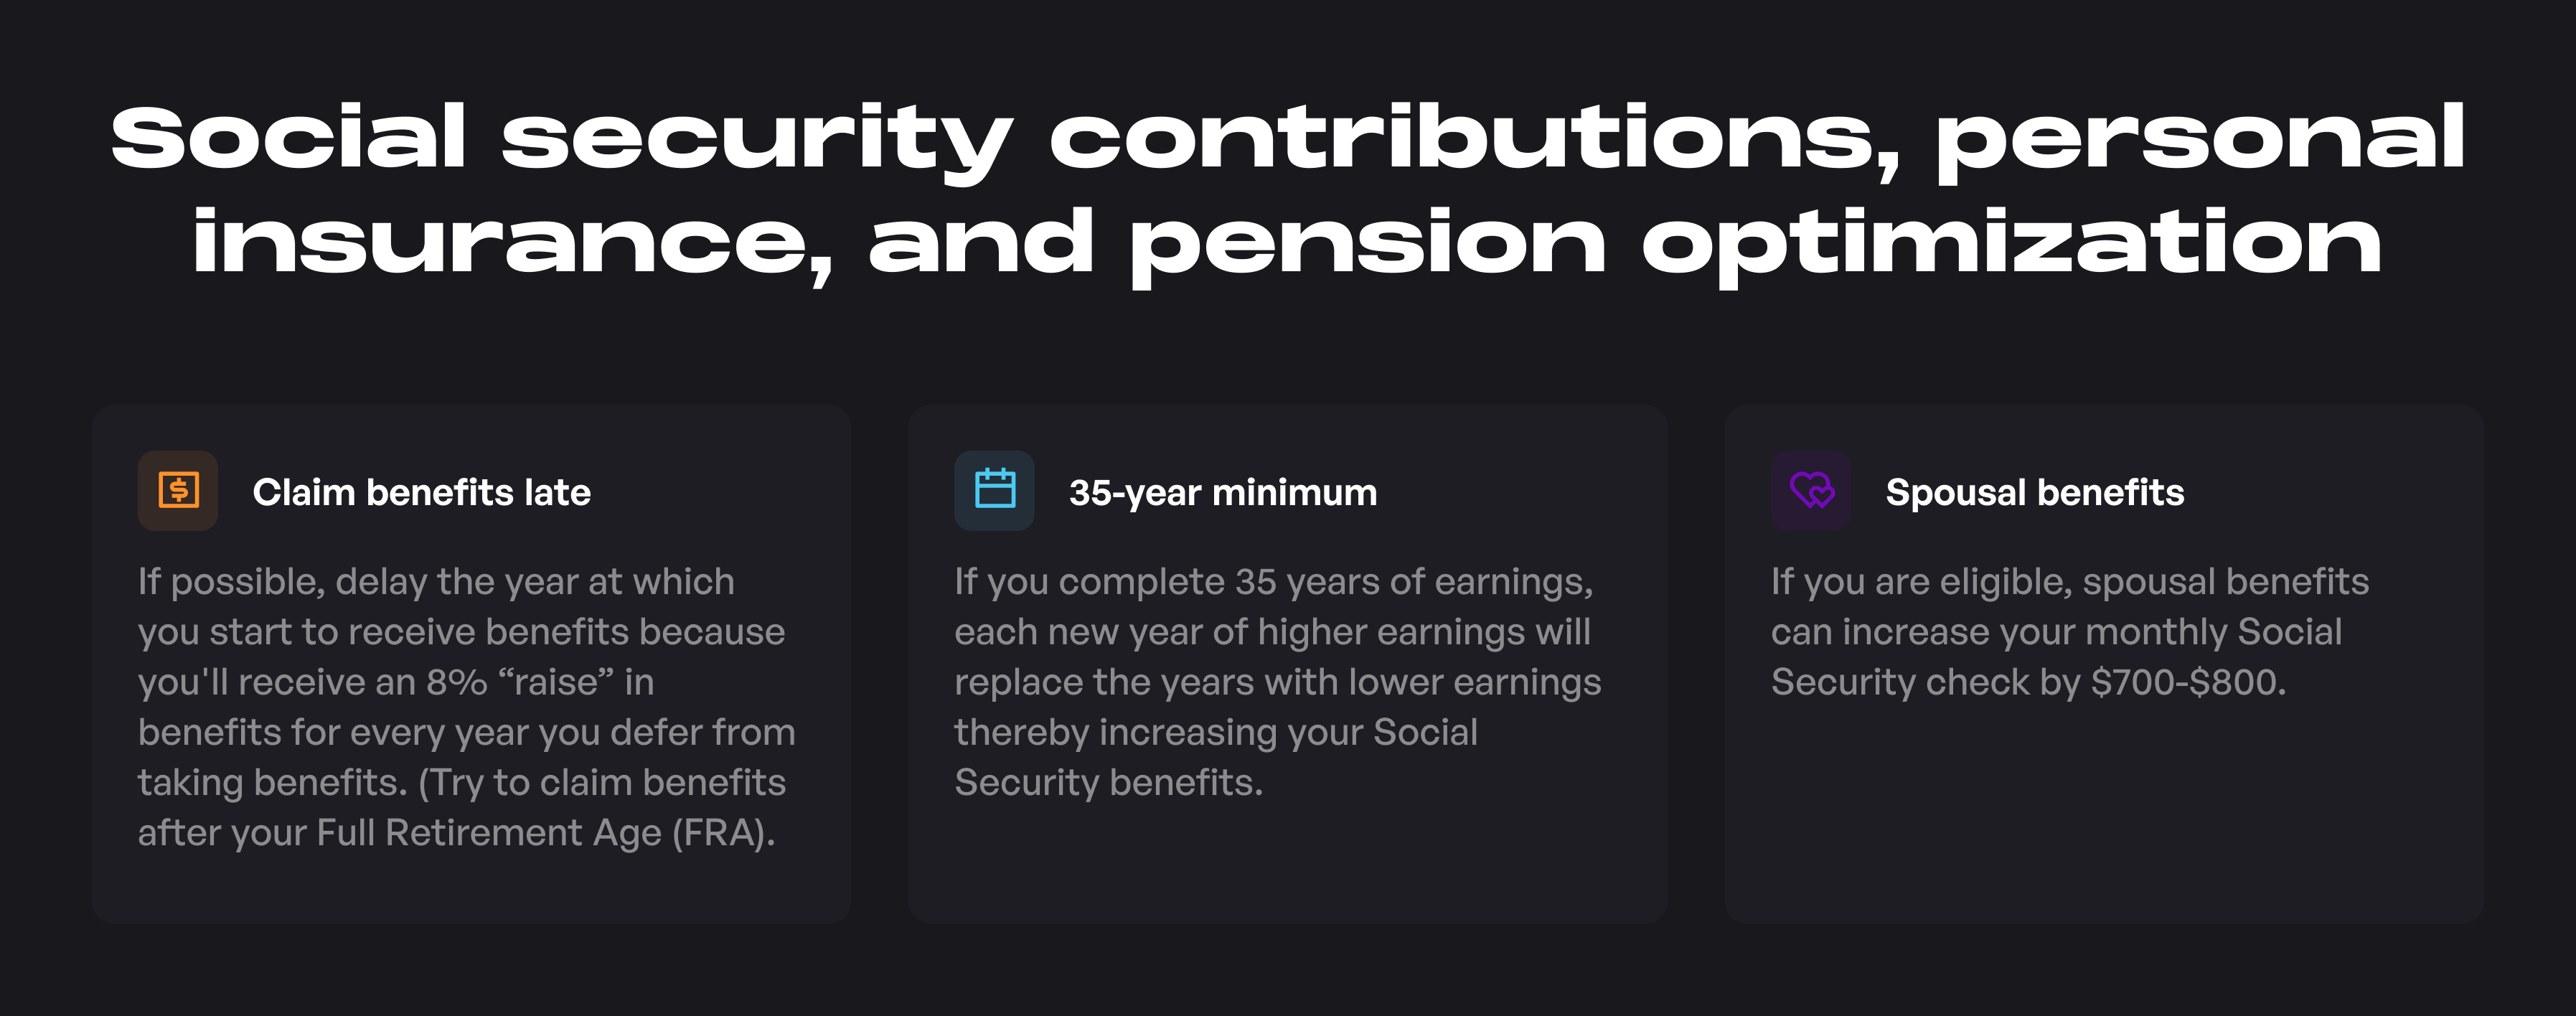 Social security contributions, person...